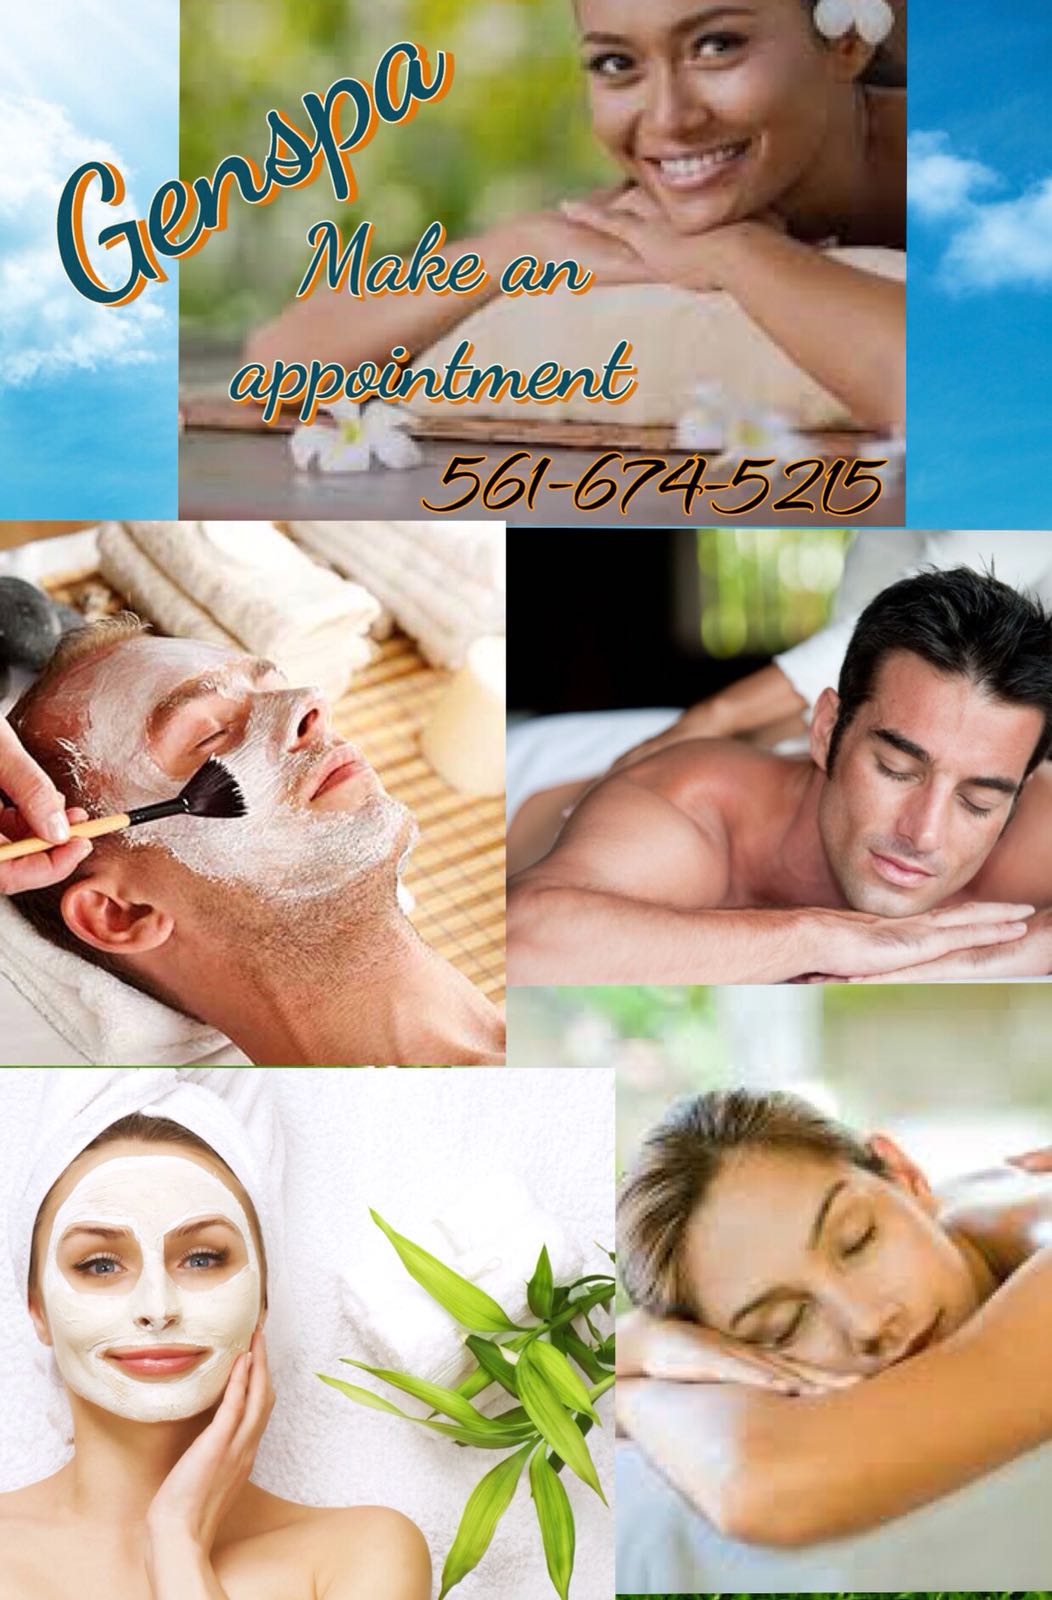 4th of July Specials at Gen Spa 5 stars rated